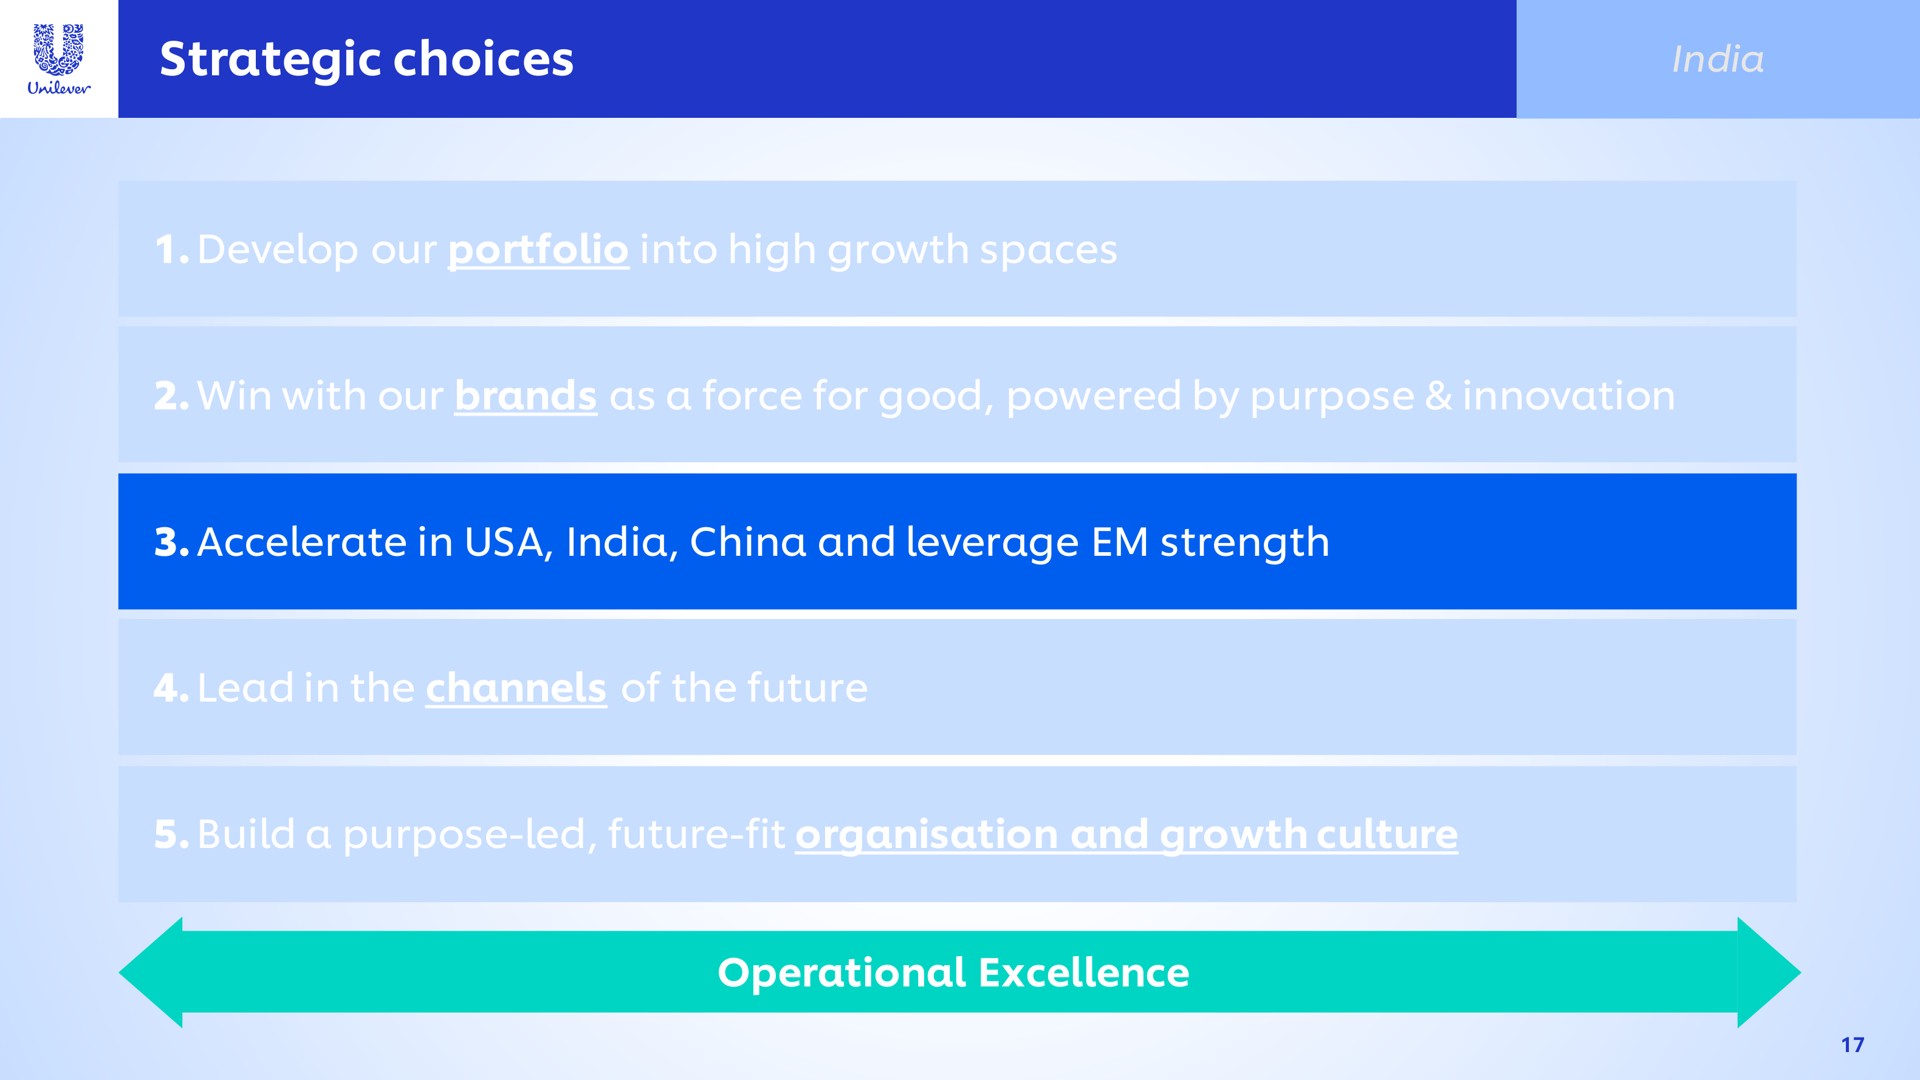 strategic choices i ate a accelerate in china and leverage strength operational excellence | Unilever